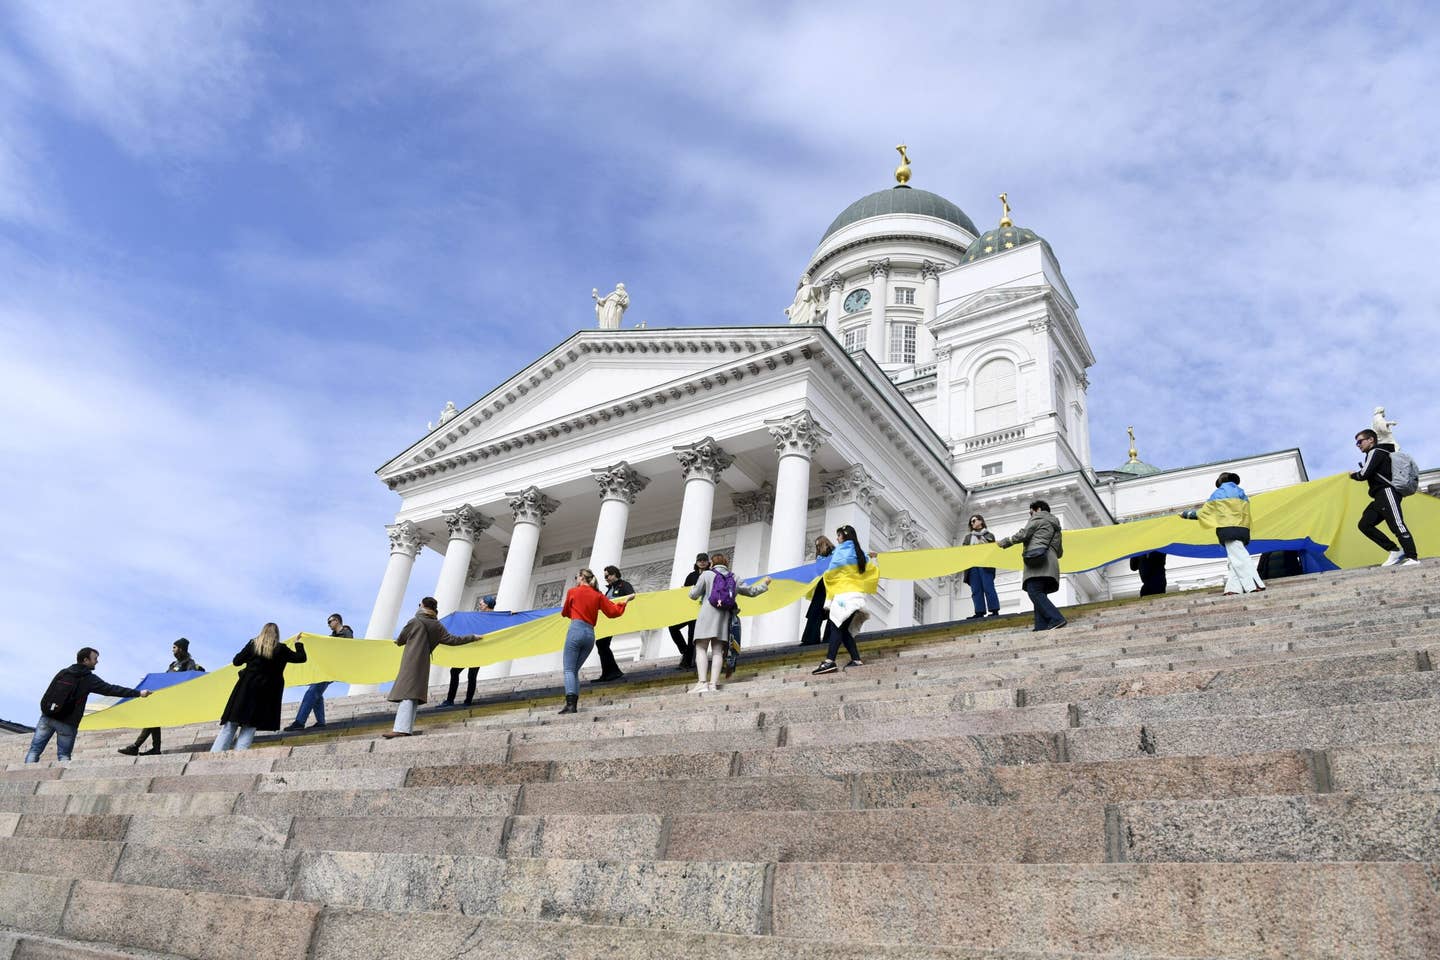 People show their support for Ukraine on the steps of Helsinki Cathedral in the Finnish capital, on April 18, 2022. <em>Photo by EMMI KORHONEN/Lehtikuva/AFP via Getty Images</em>